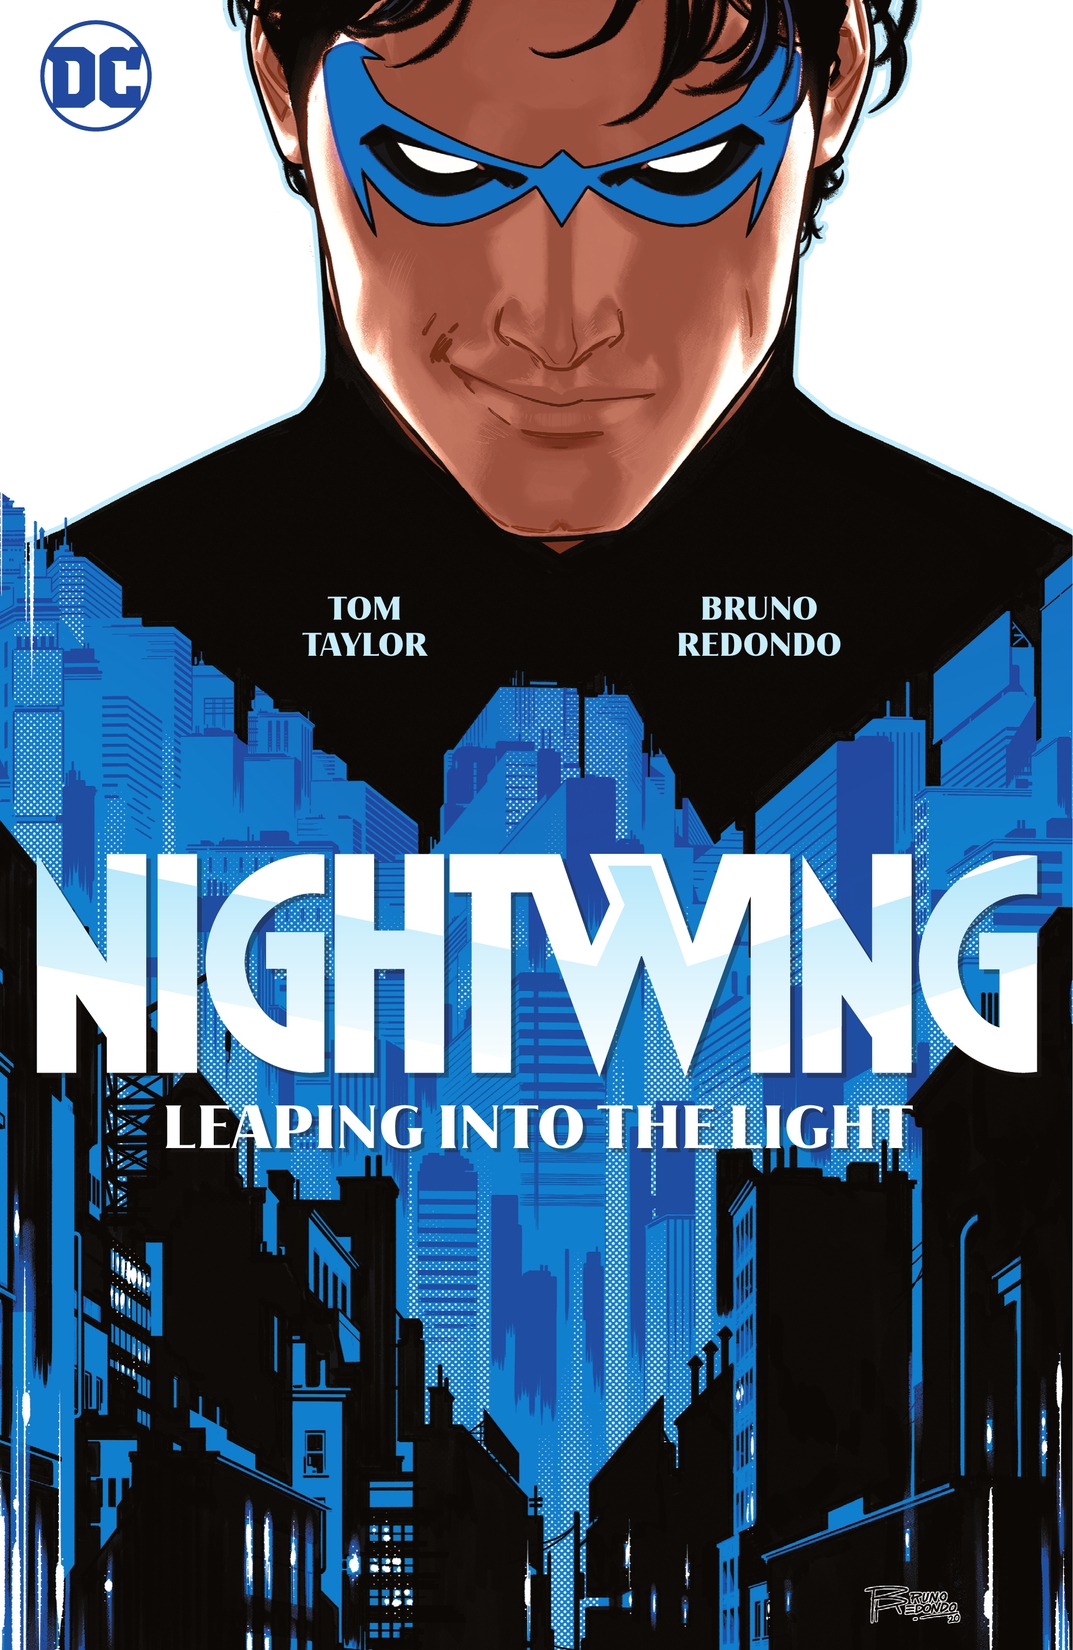 Nightwing Vol. 1: Leaping into the Light preview images